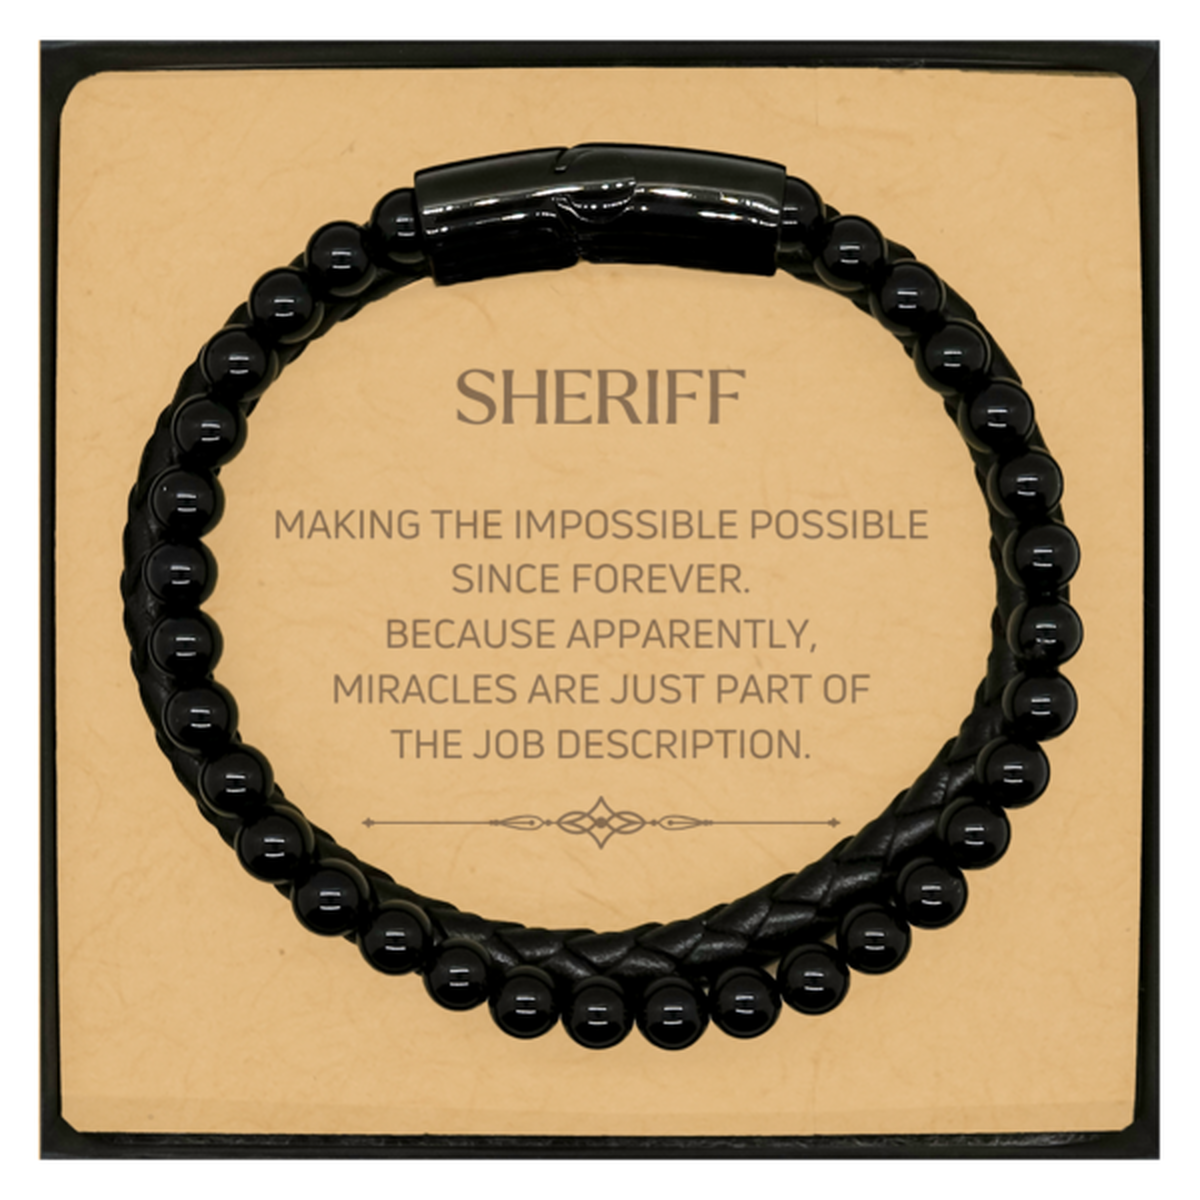 Funny Sheriff Gifts, Miracles are just part of the job description, Inspirational Birthday Christmas Stone Leather Bracelets For Sheriff, Men, Women, Coworkers, Friends, Boss